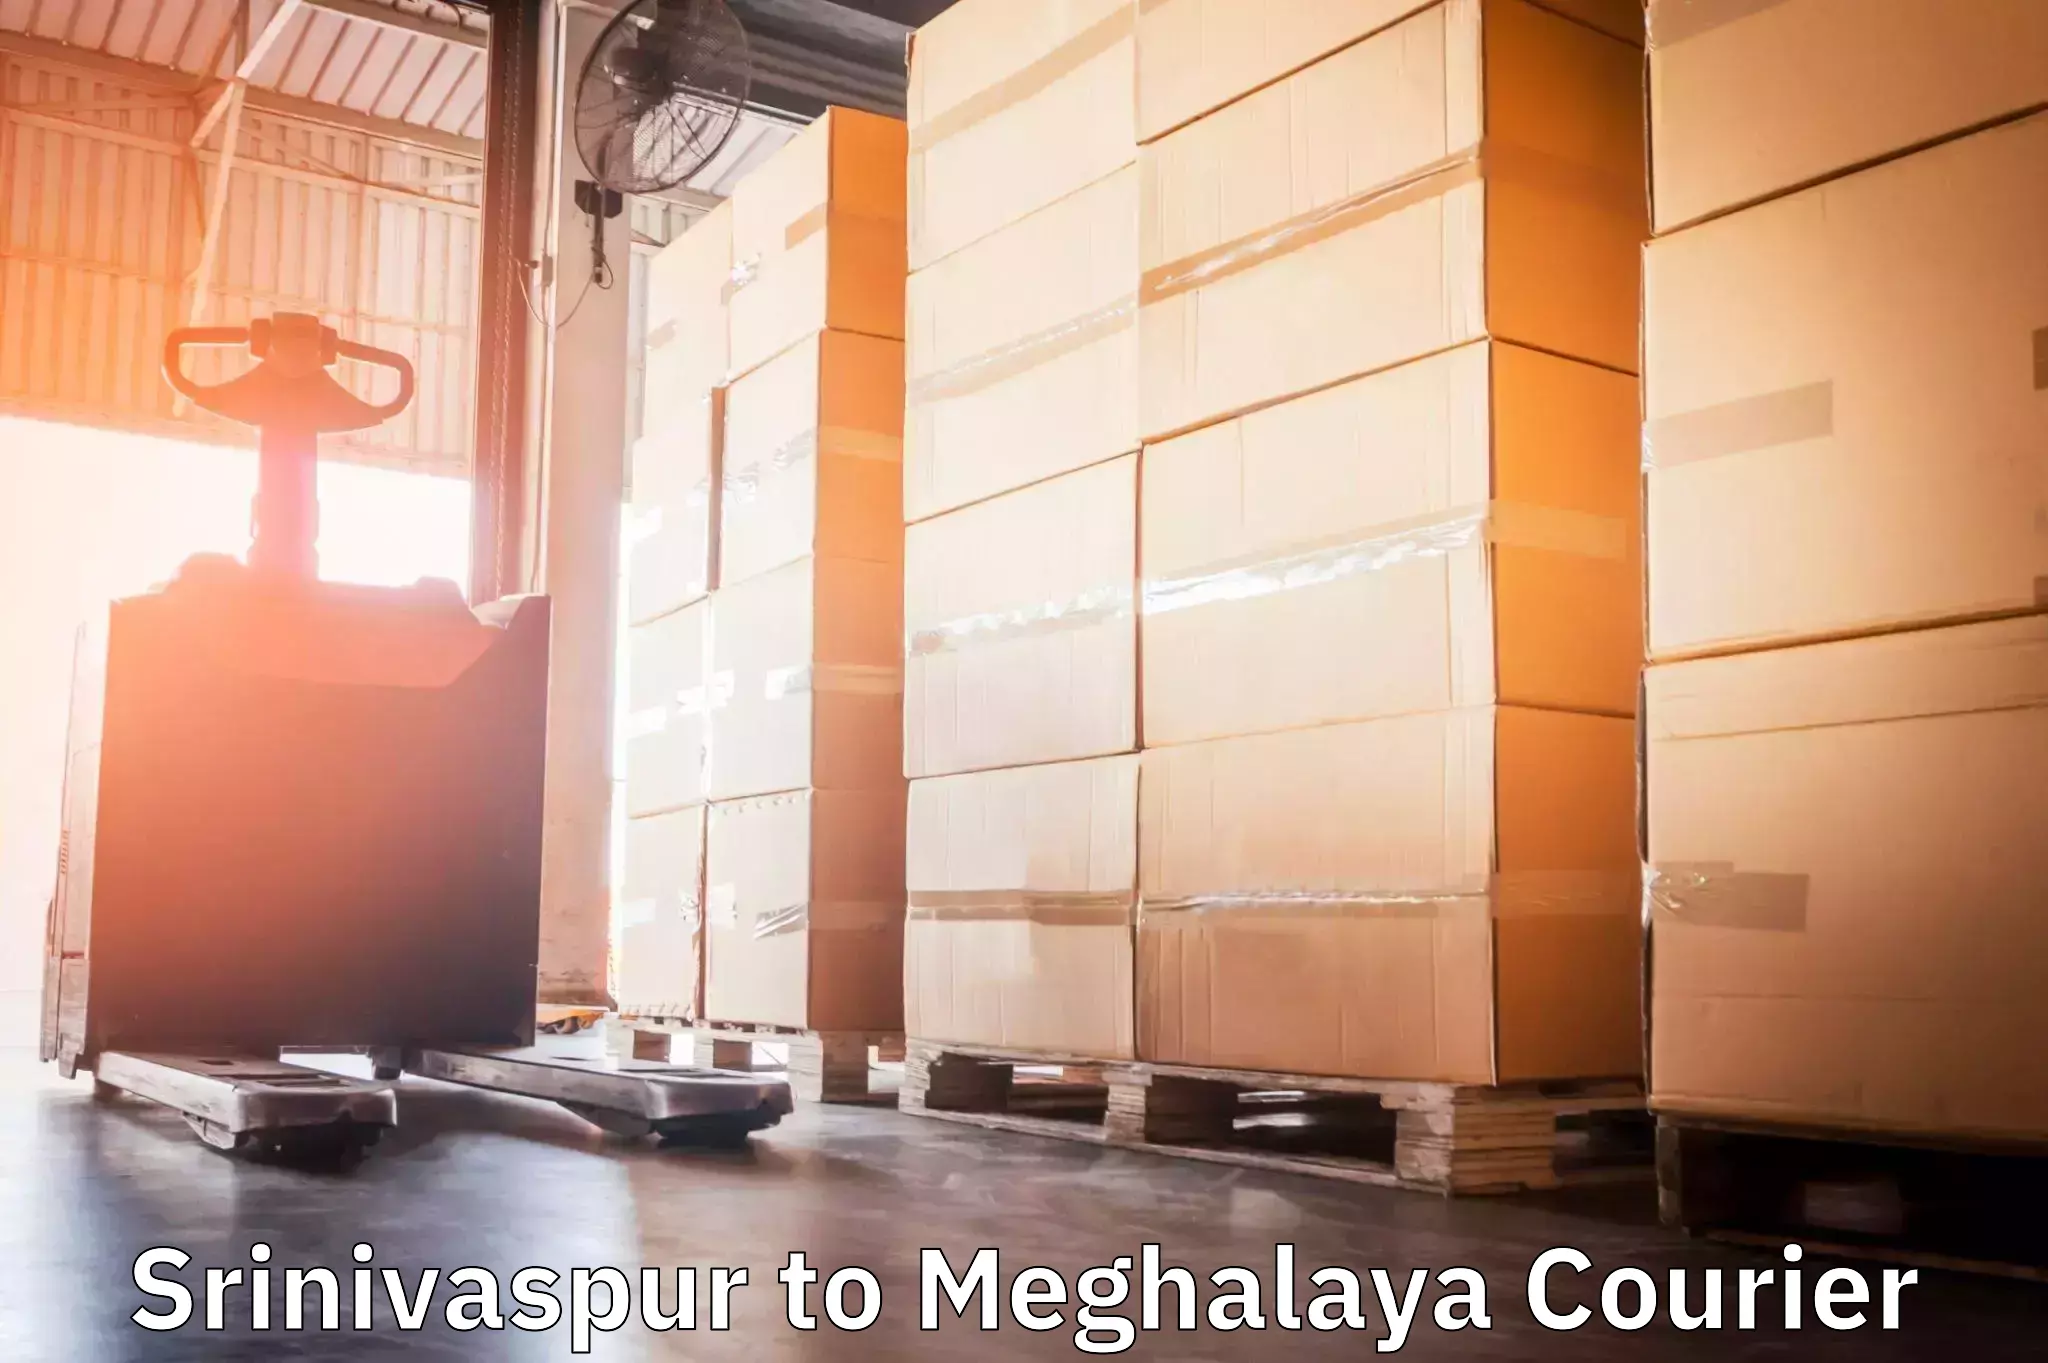 Courier services in Srinivaspur to Meghalaya